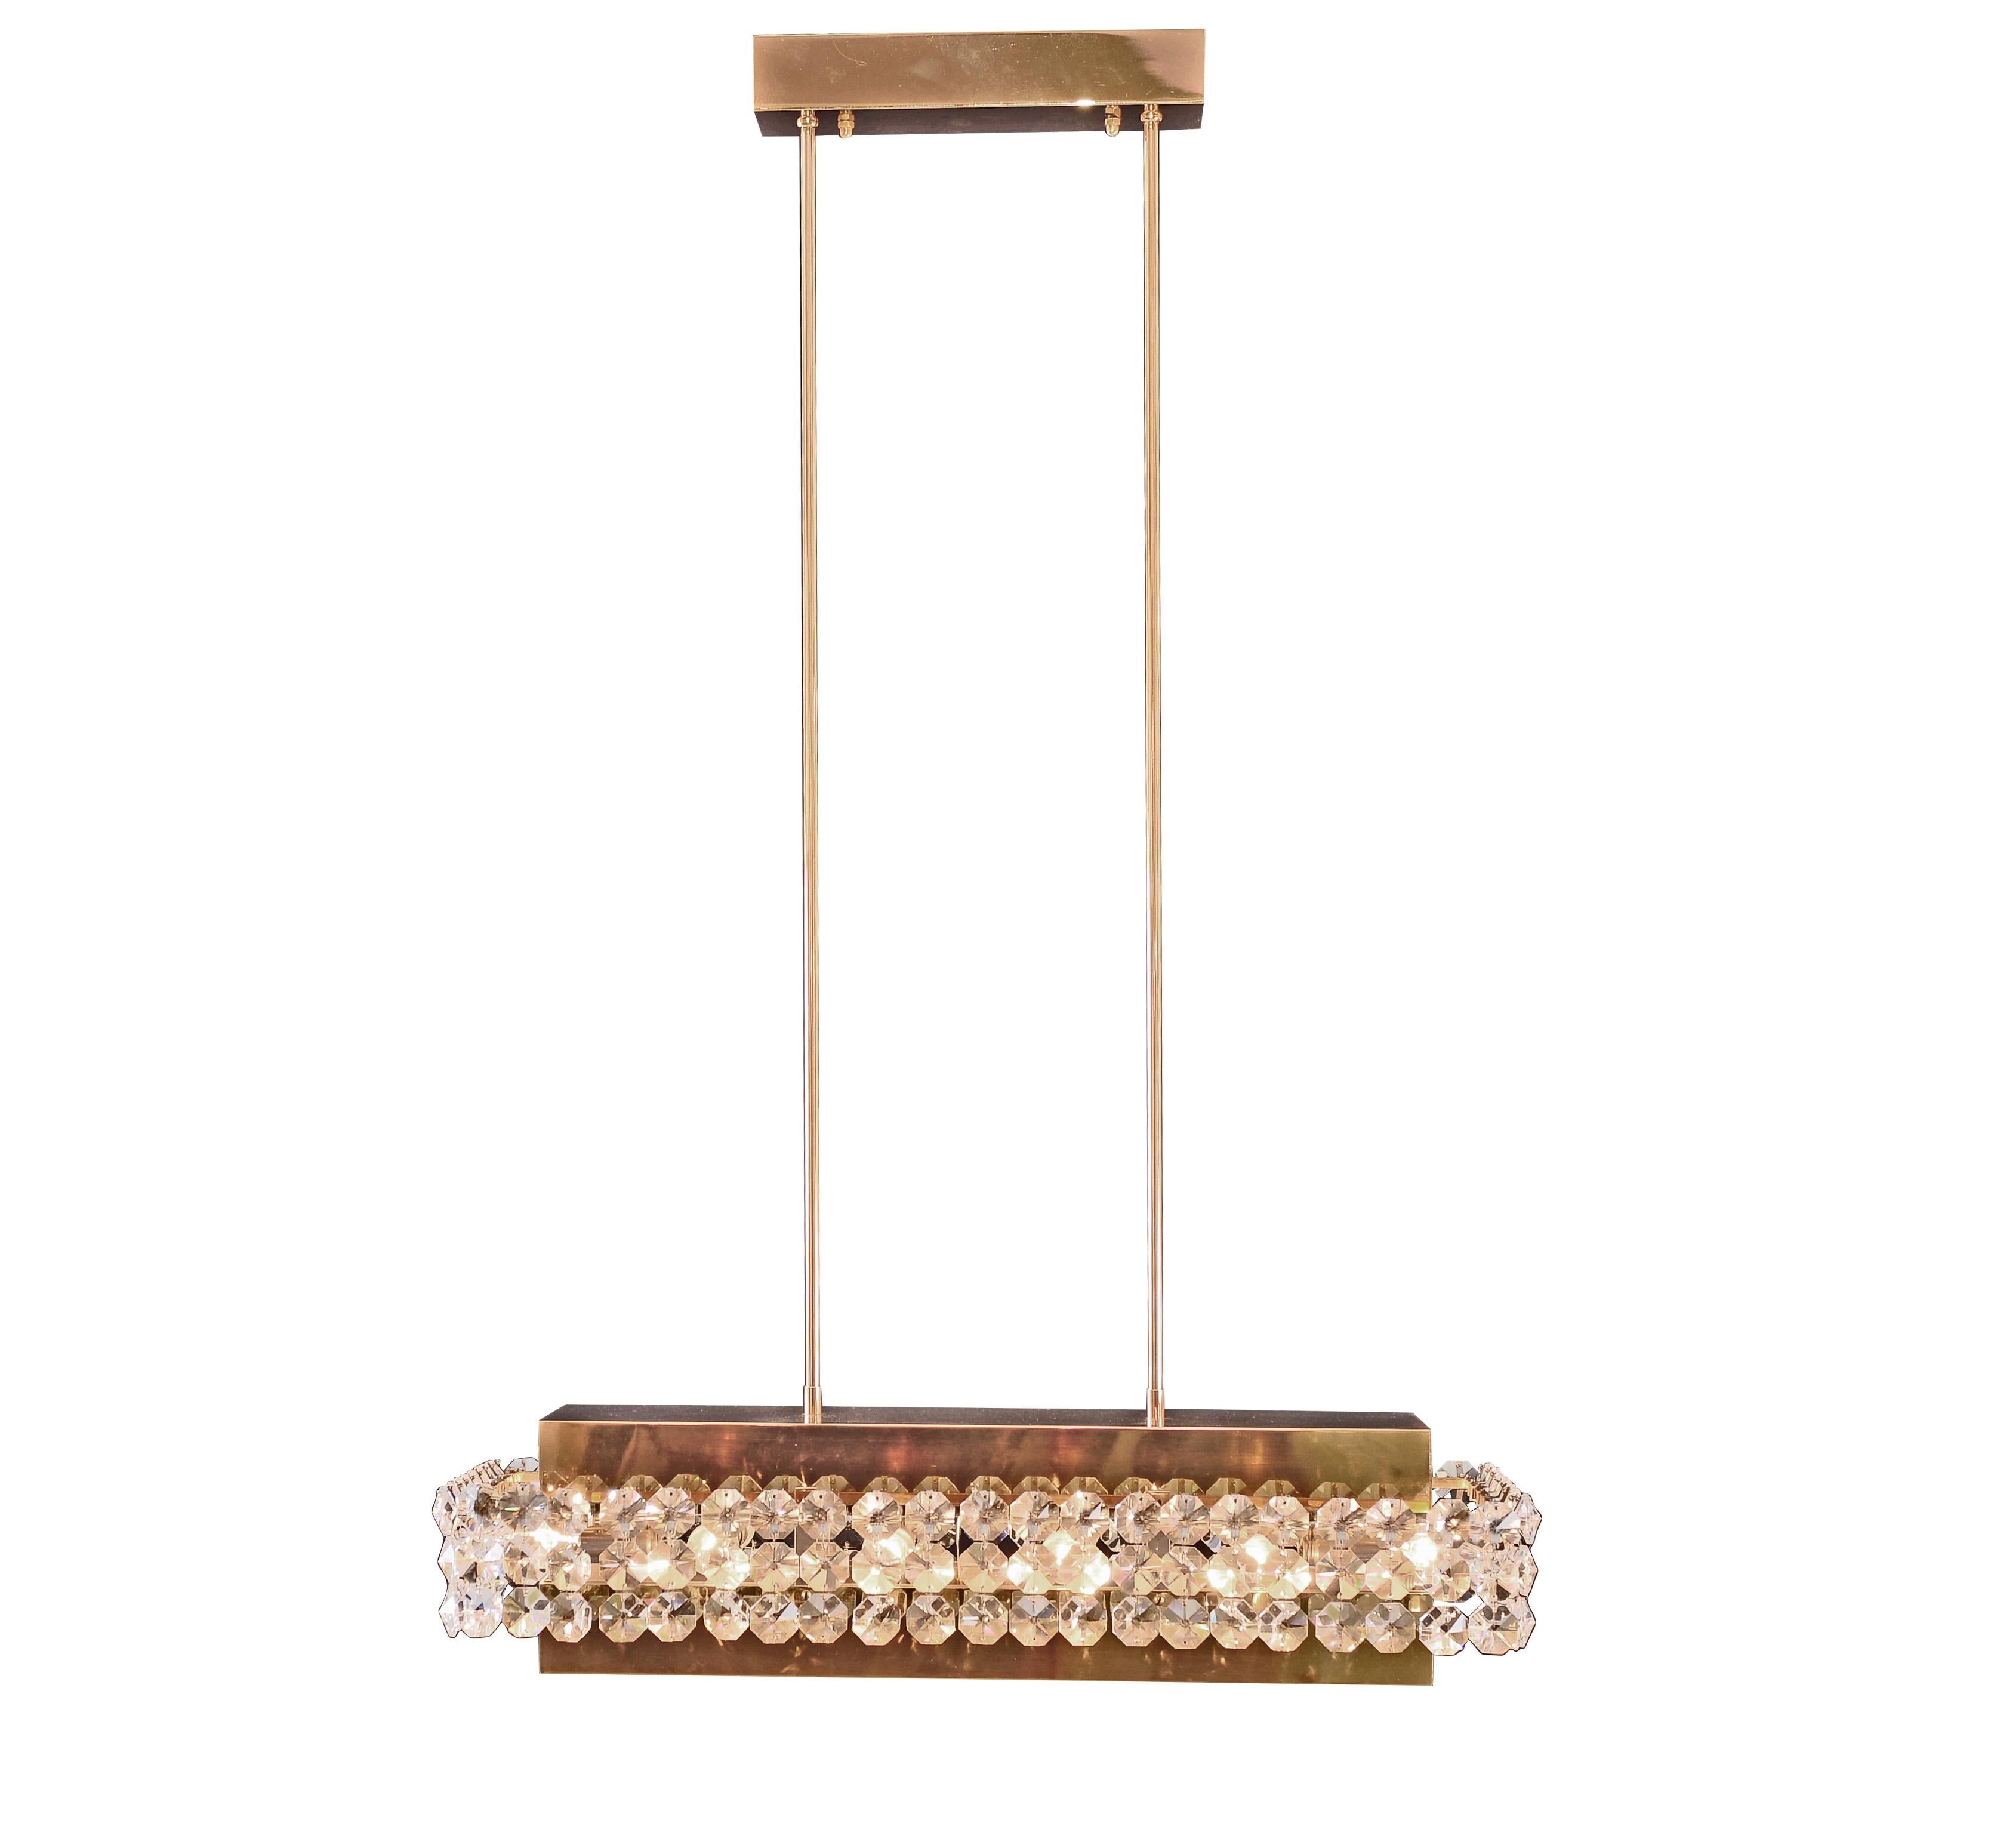 Details about   NOS  BRASS PLATED CHANDELIER LAMP PART WITH 3 ARMS. 